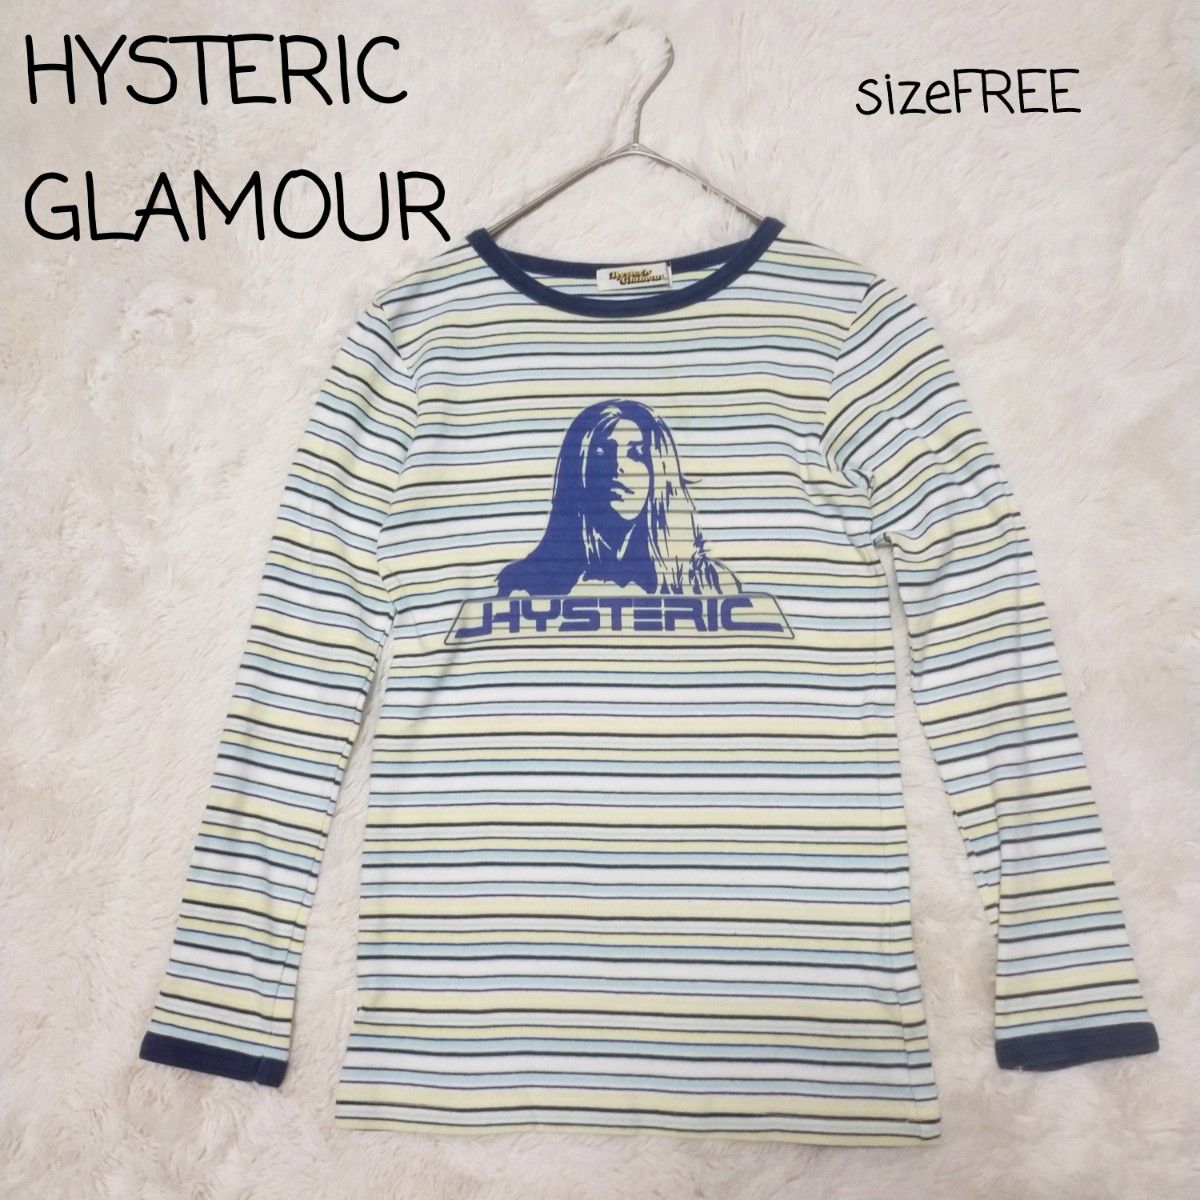 HYSTERIC GLAMOUR ヒステリックグラマー ボーダー 長袖 カットソー  sizeフリー イエロー ブルー ヒスガール